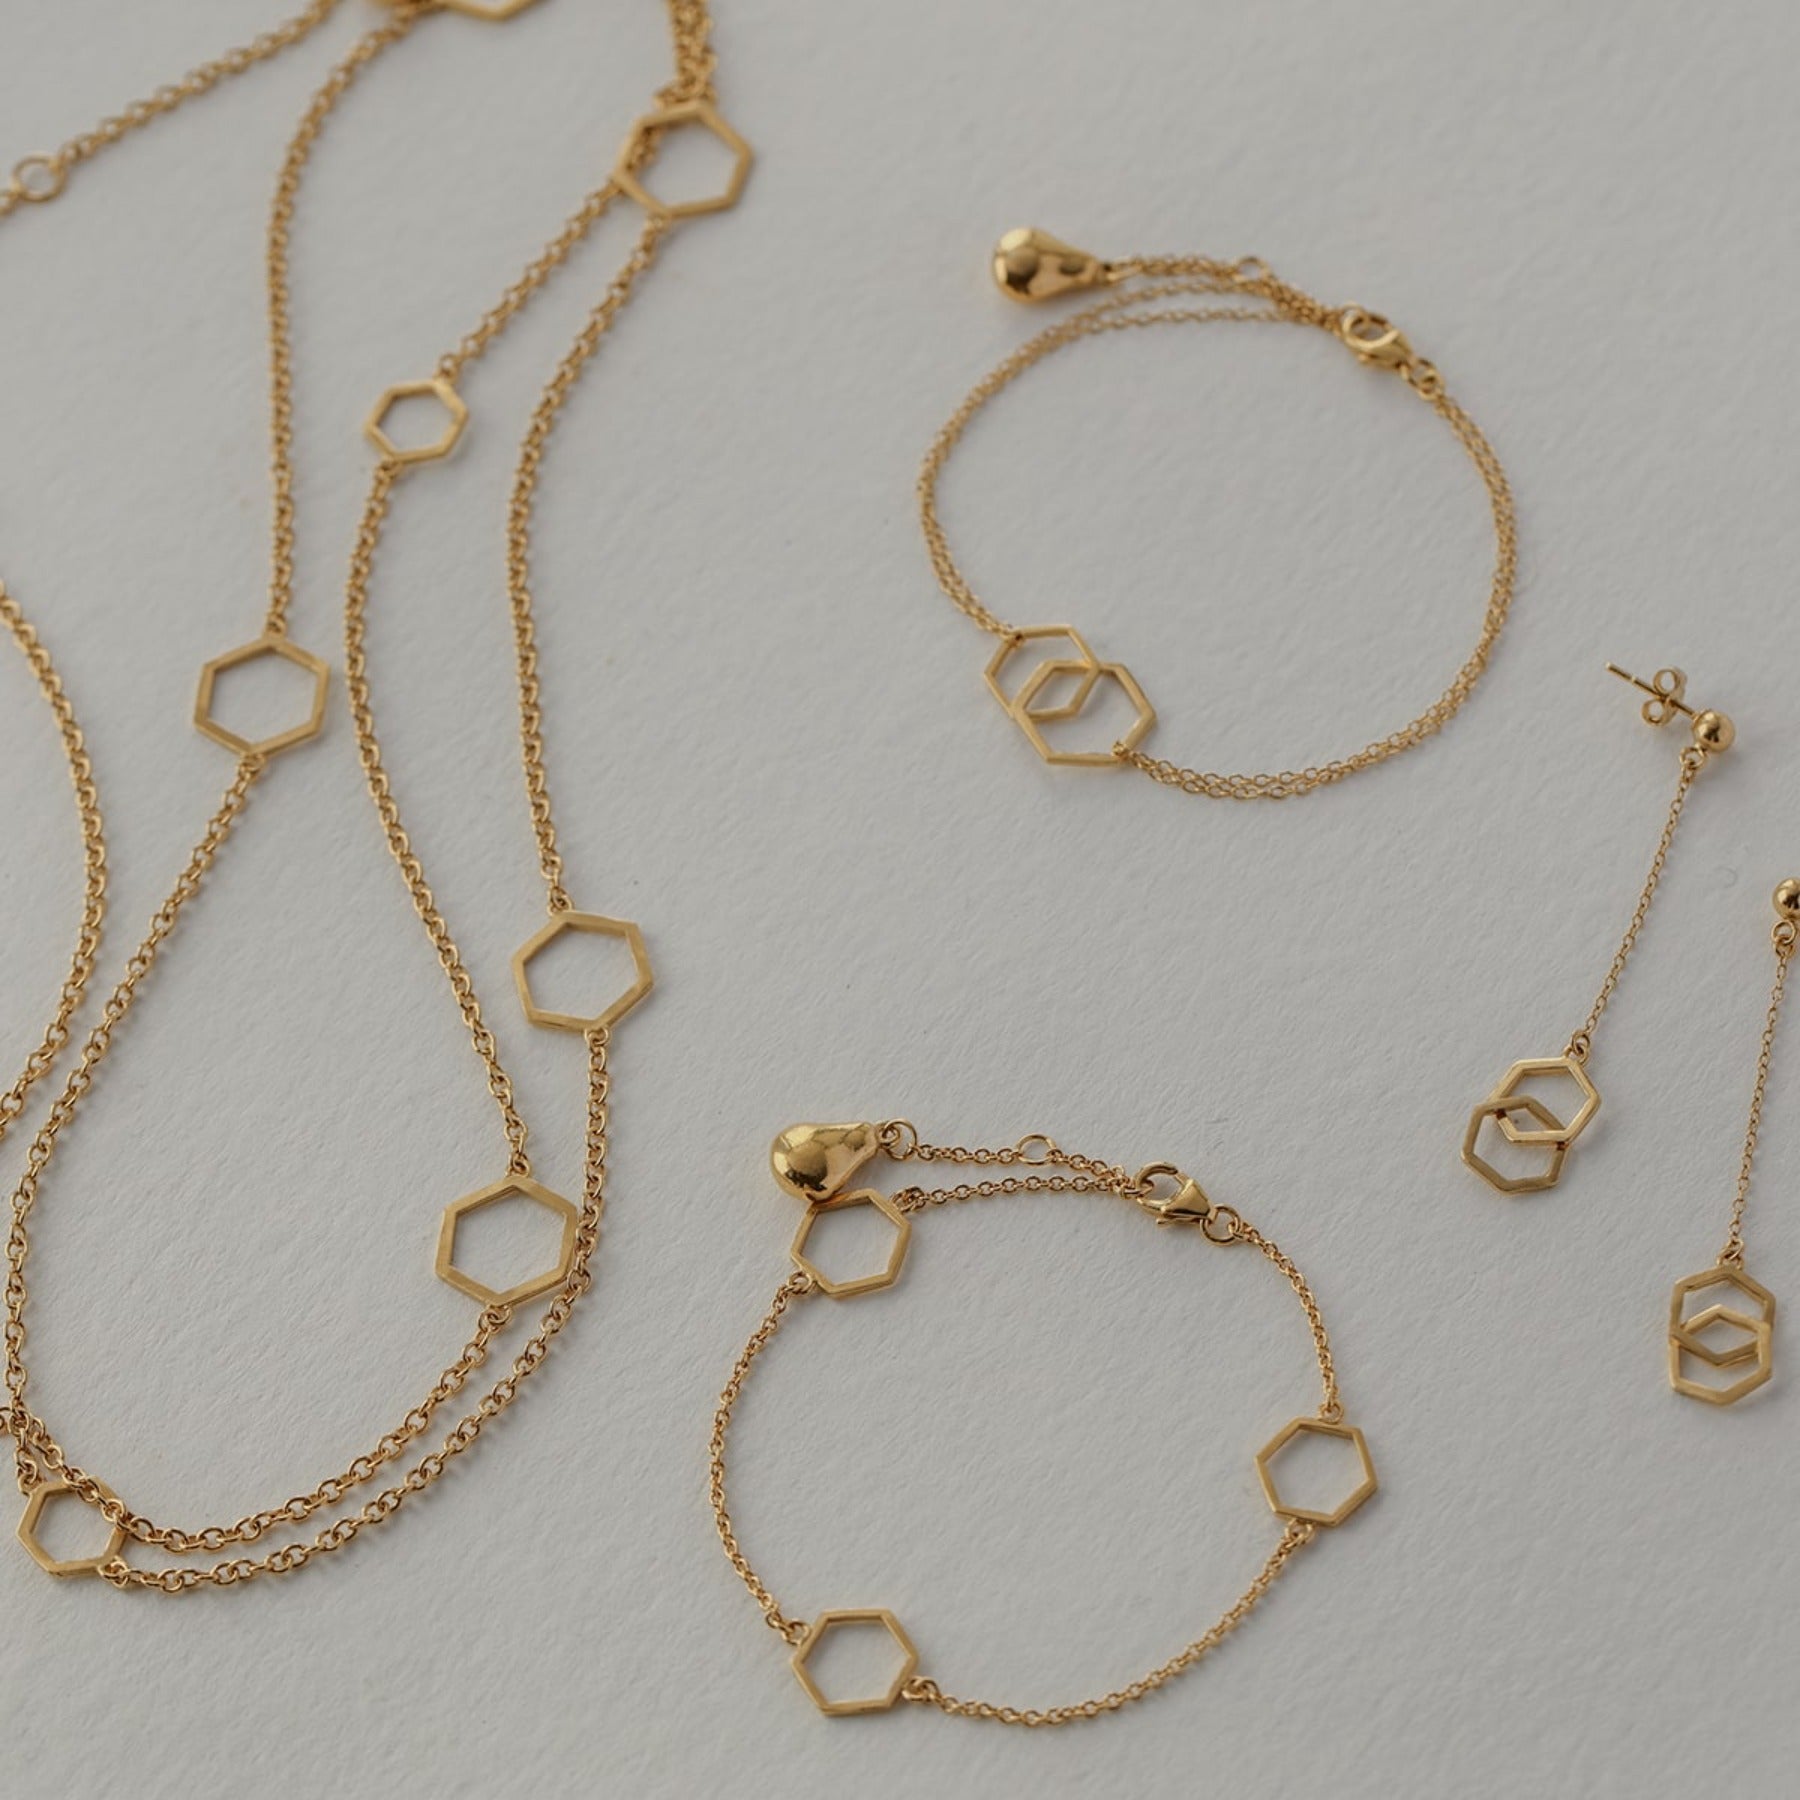 Geometric long necklace with nine large and small hexagons stationed along a cable chain and finished with an Anjou pear charm in 18k gold vermeil.